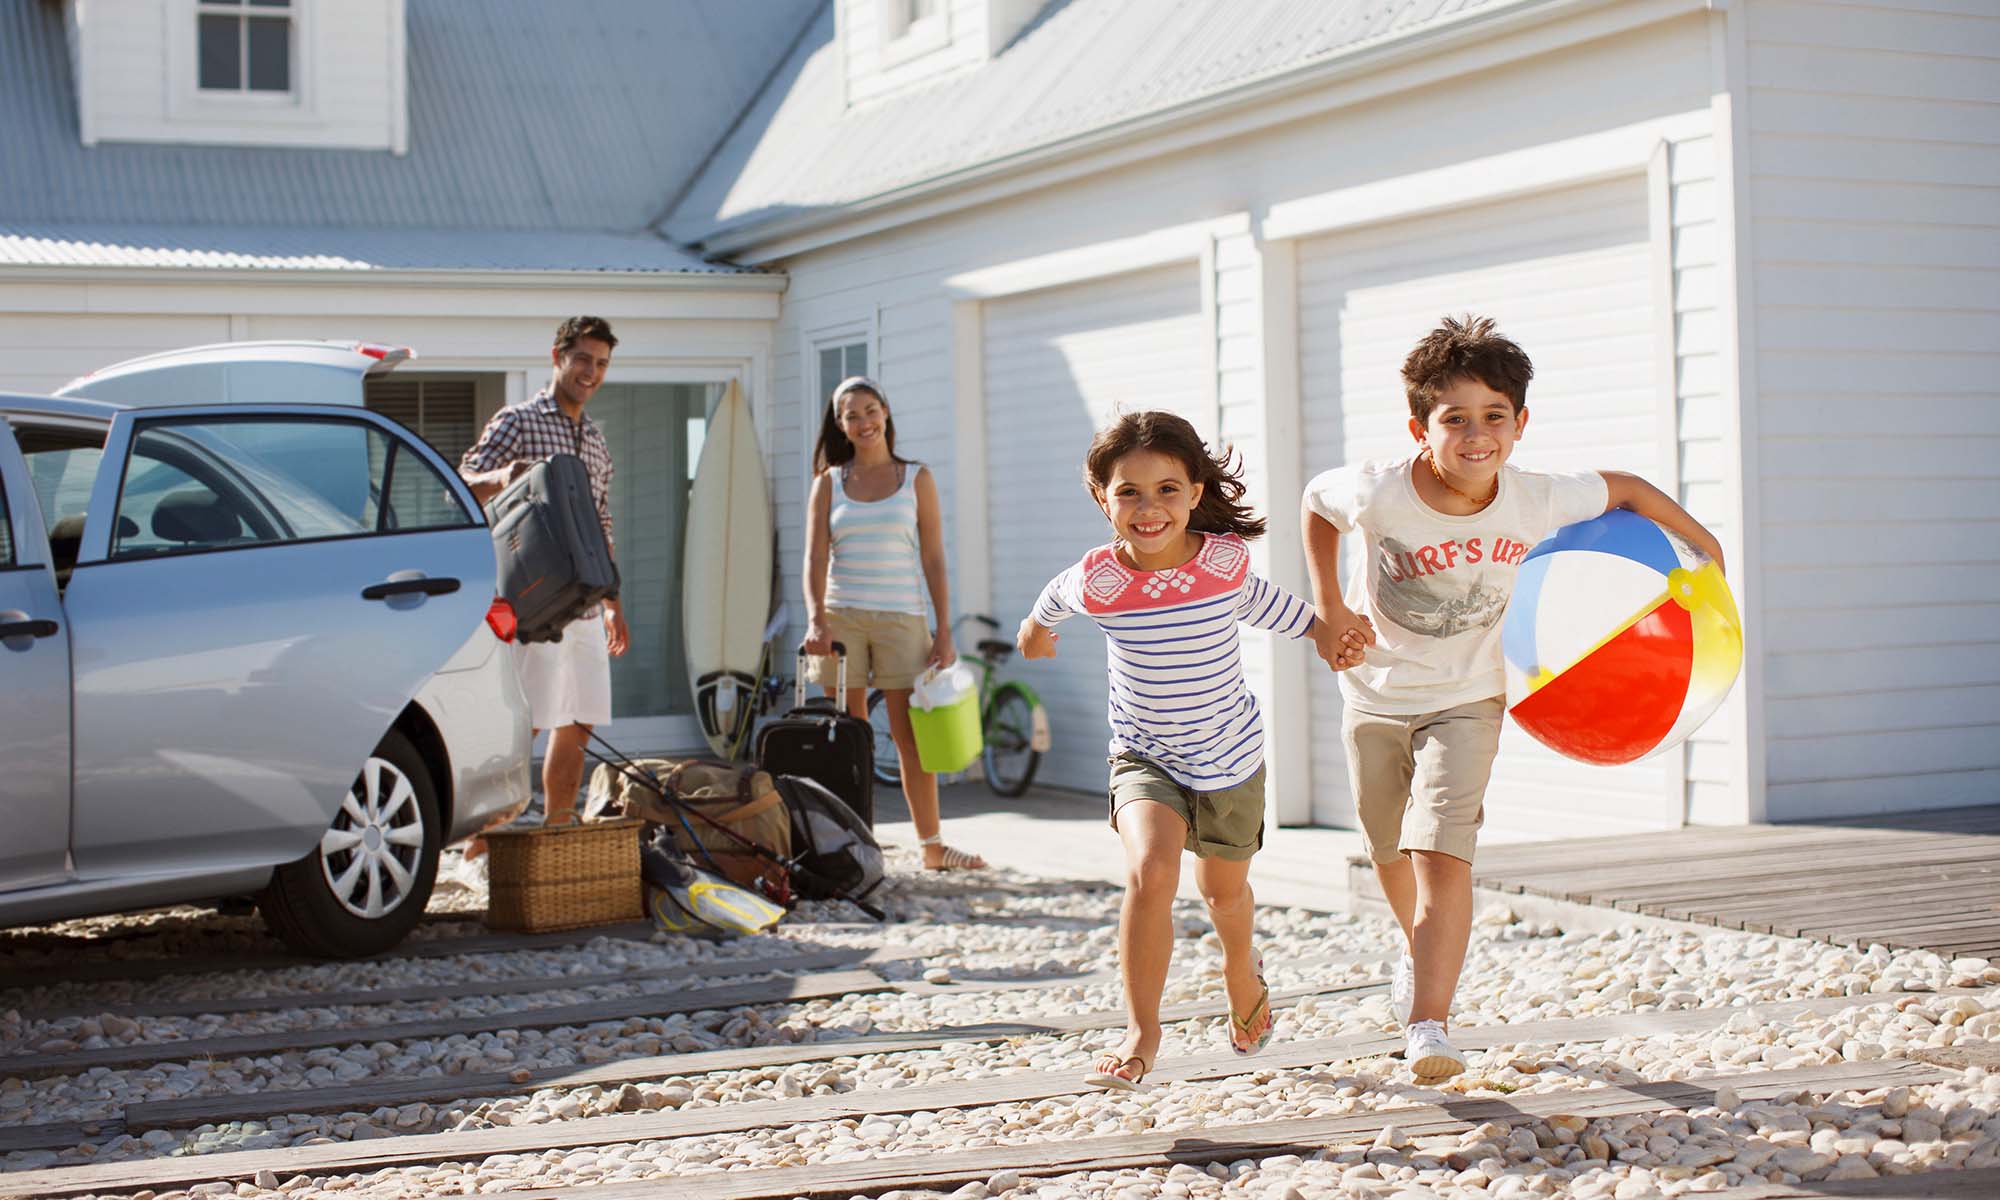 A young brother and sister run toward the camera while their parents unpack their vehicle at a vacation home.